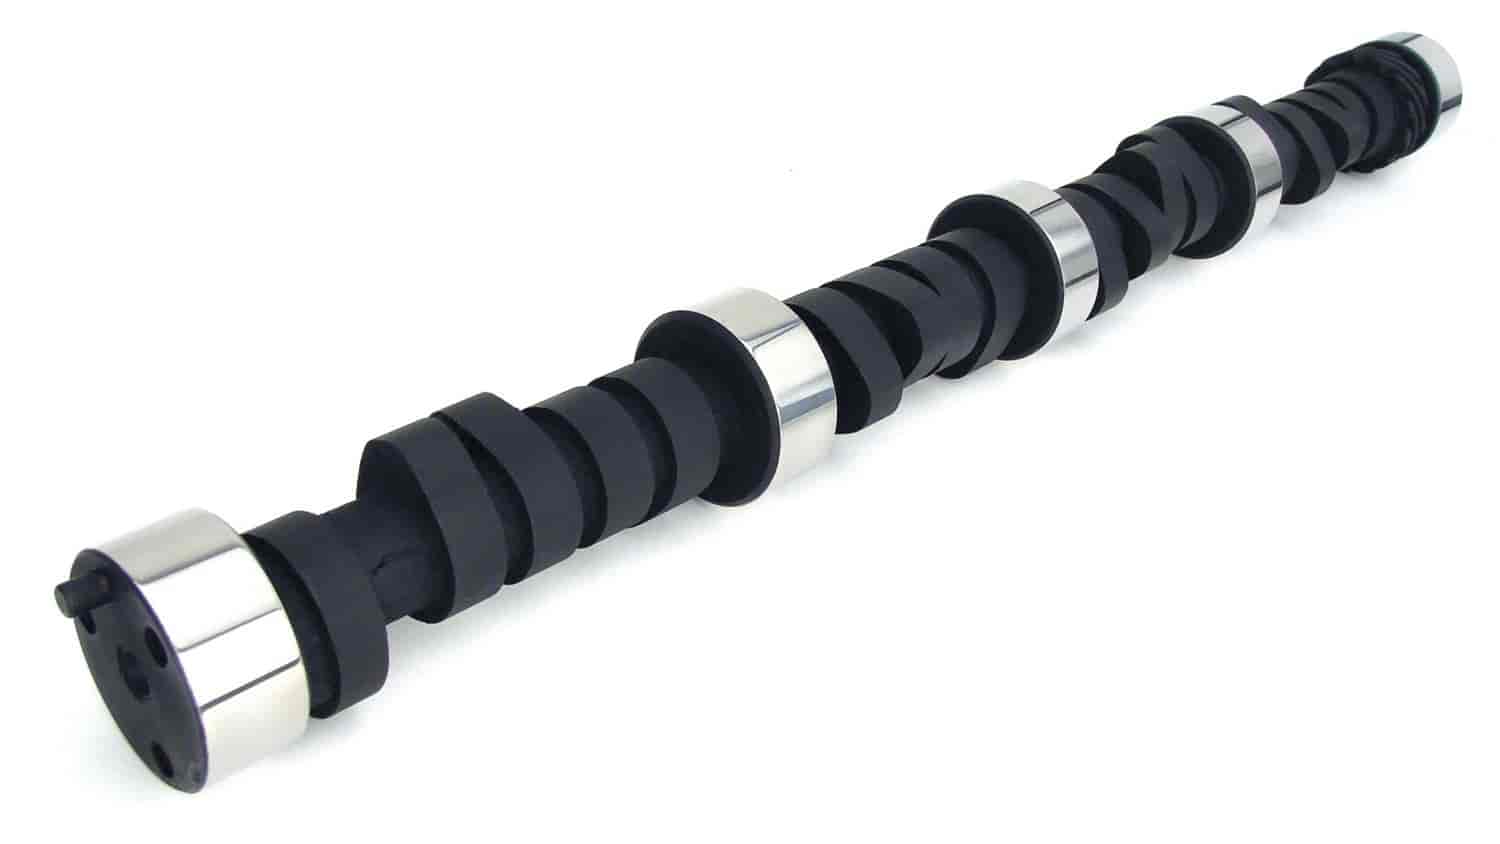 Xtreme Energy 268H Hydraulic Flat Tappet Camshaft Only Lift: .477" /.480" Duration: 268°/280° RPM Range: 1600-5800